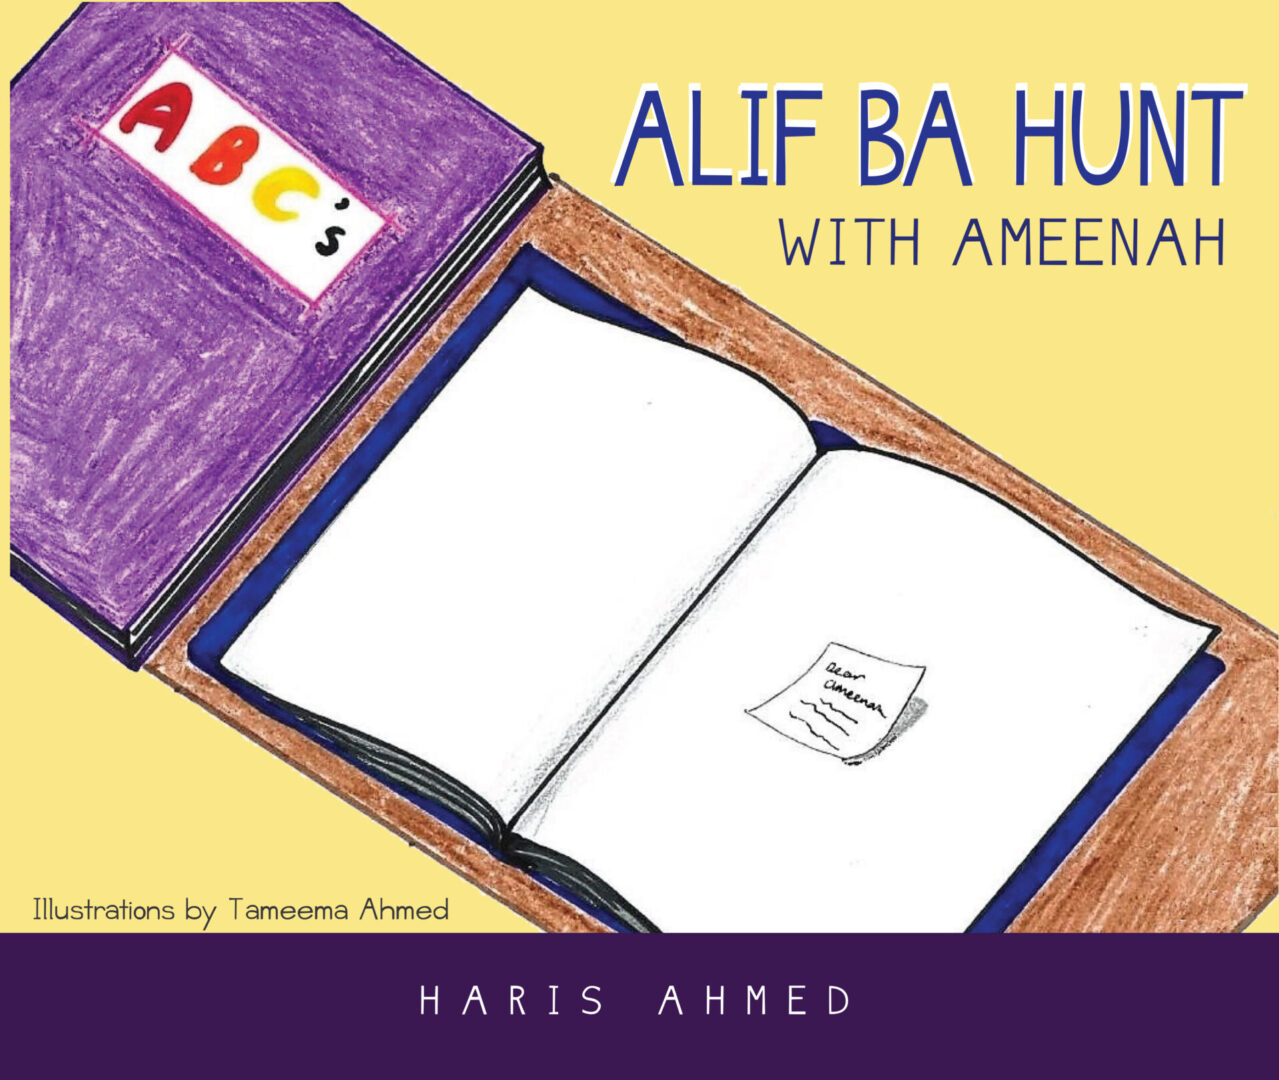 Illustrated children's book titled "Alif Ba Hunt with Ameenah" by Haris Ahmed, featuring colorful drawings, including an open book with Arabic script.